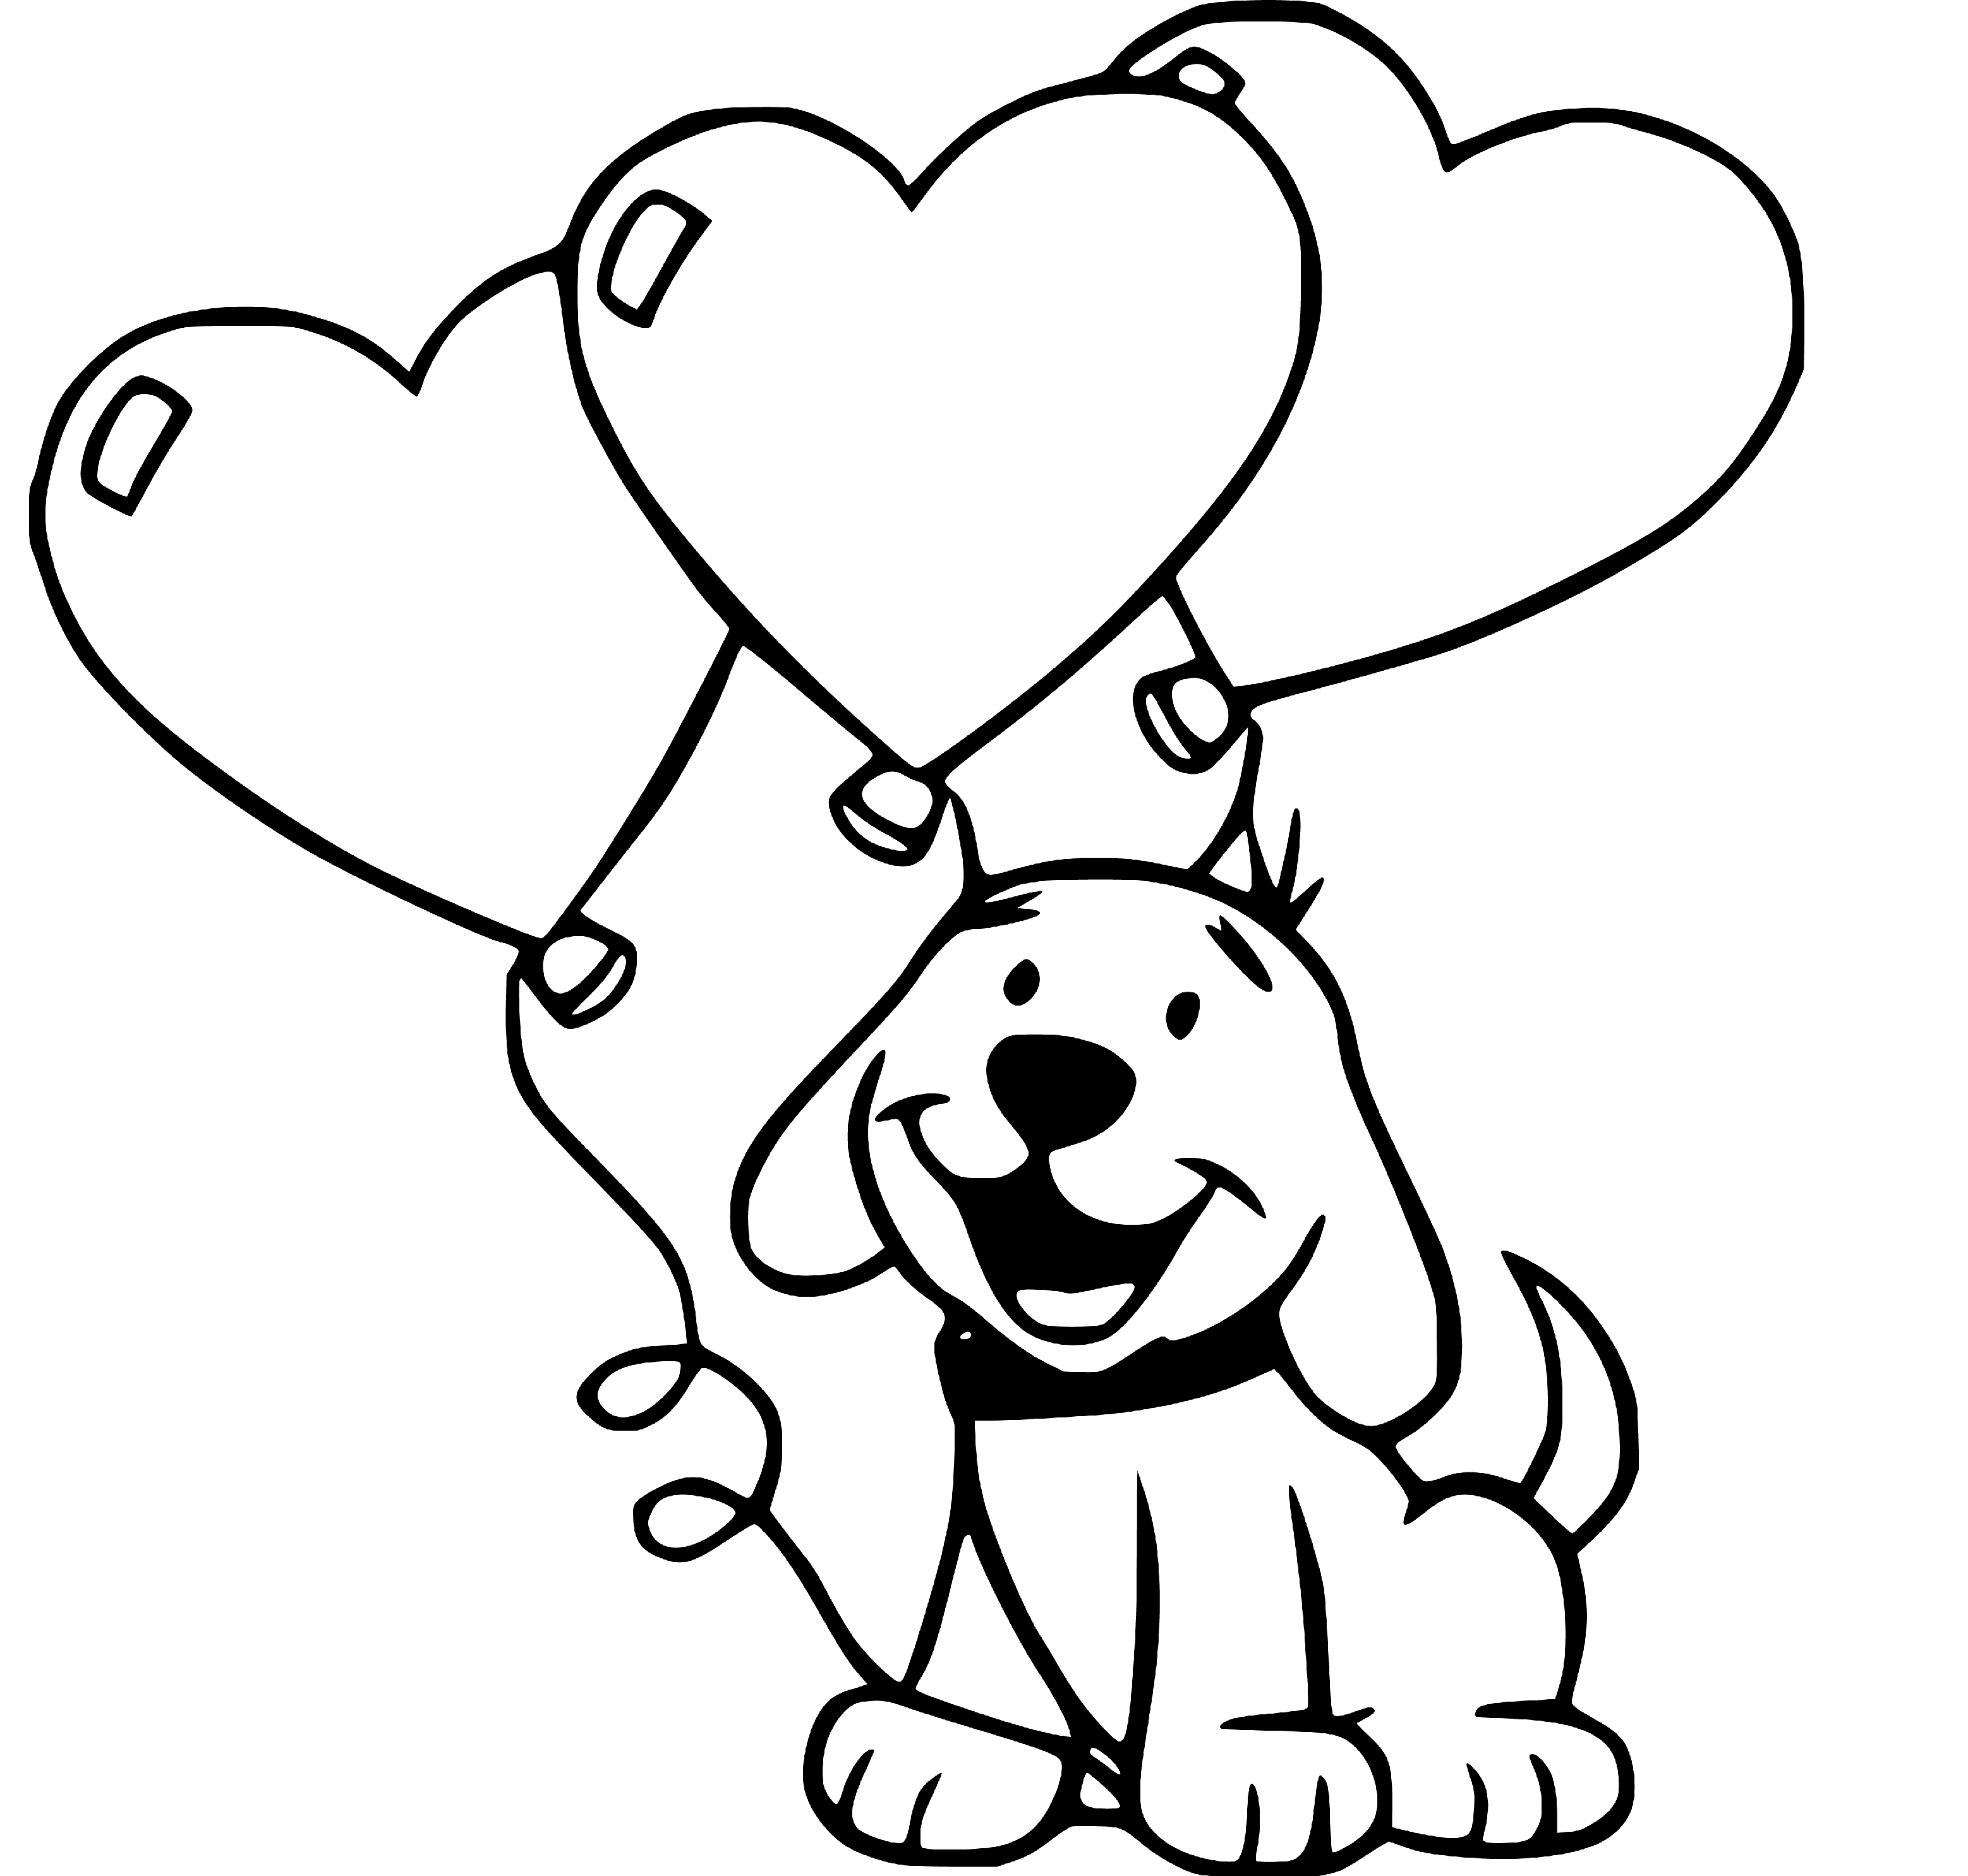 Puppy and Baloons drawing page black and white - SheetalColor.com